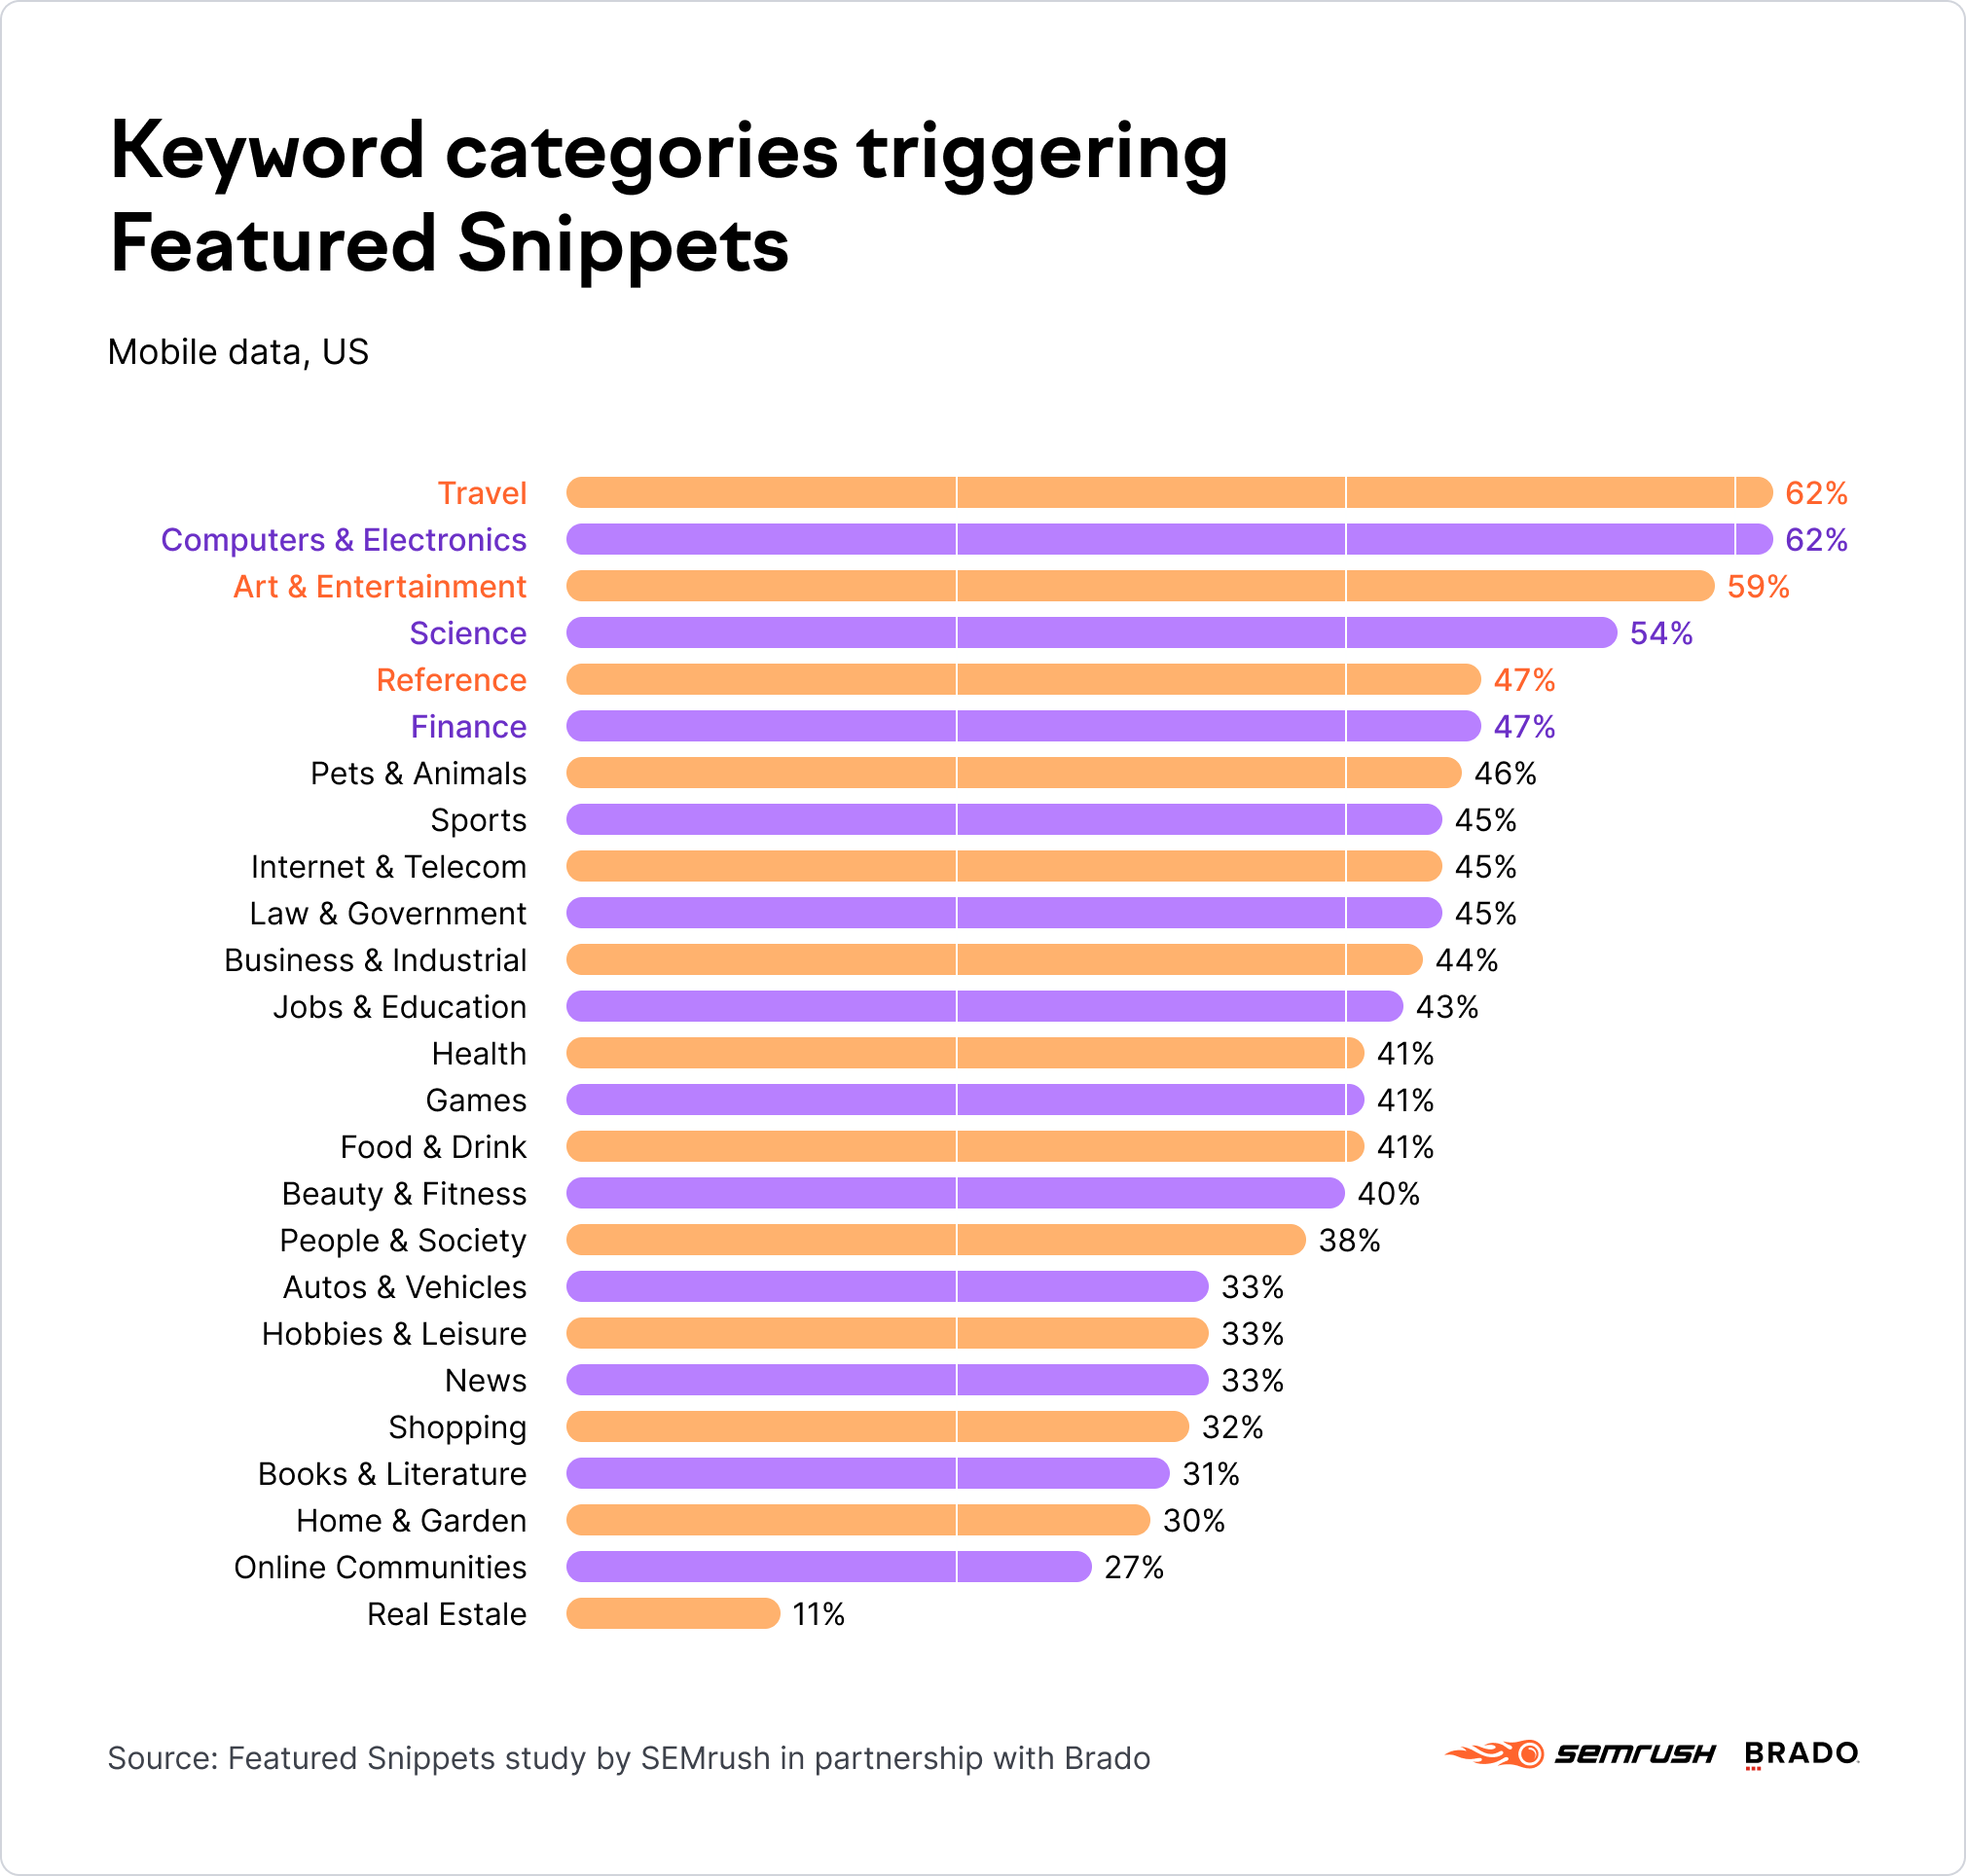 Keyword categories triggering featured snippets